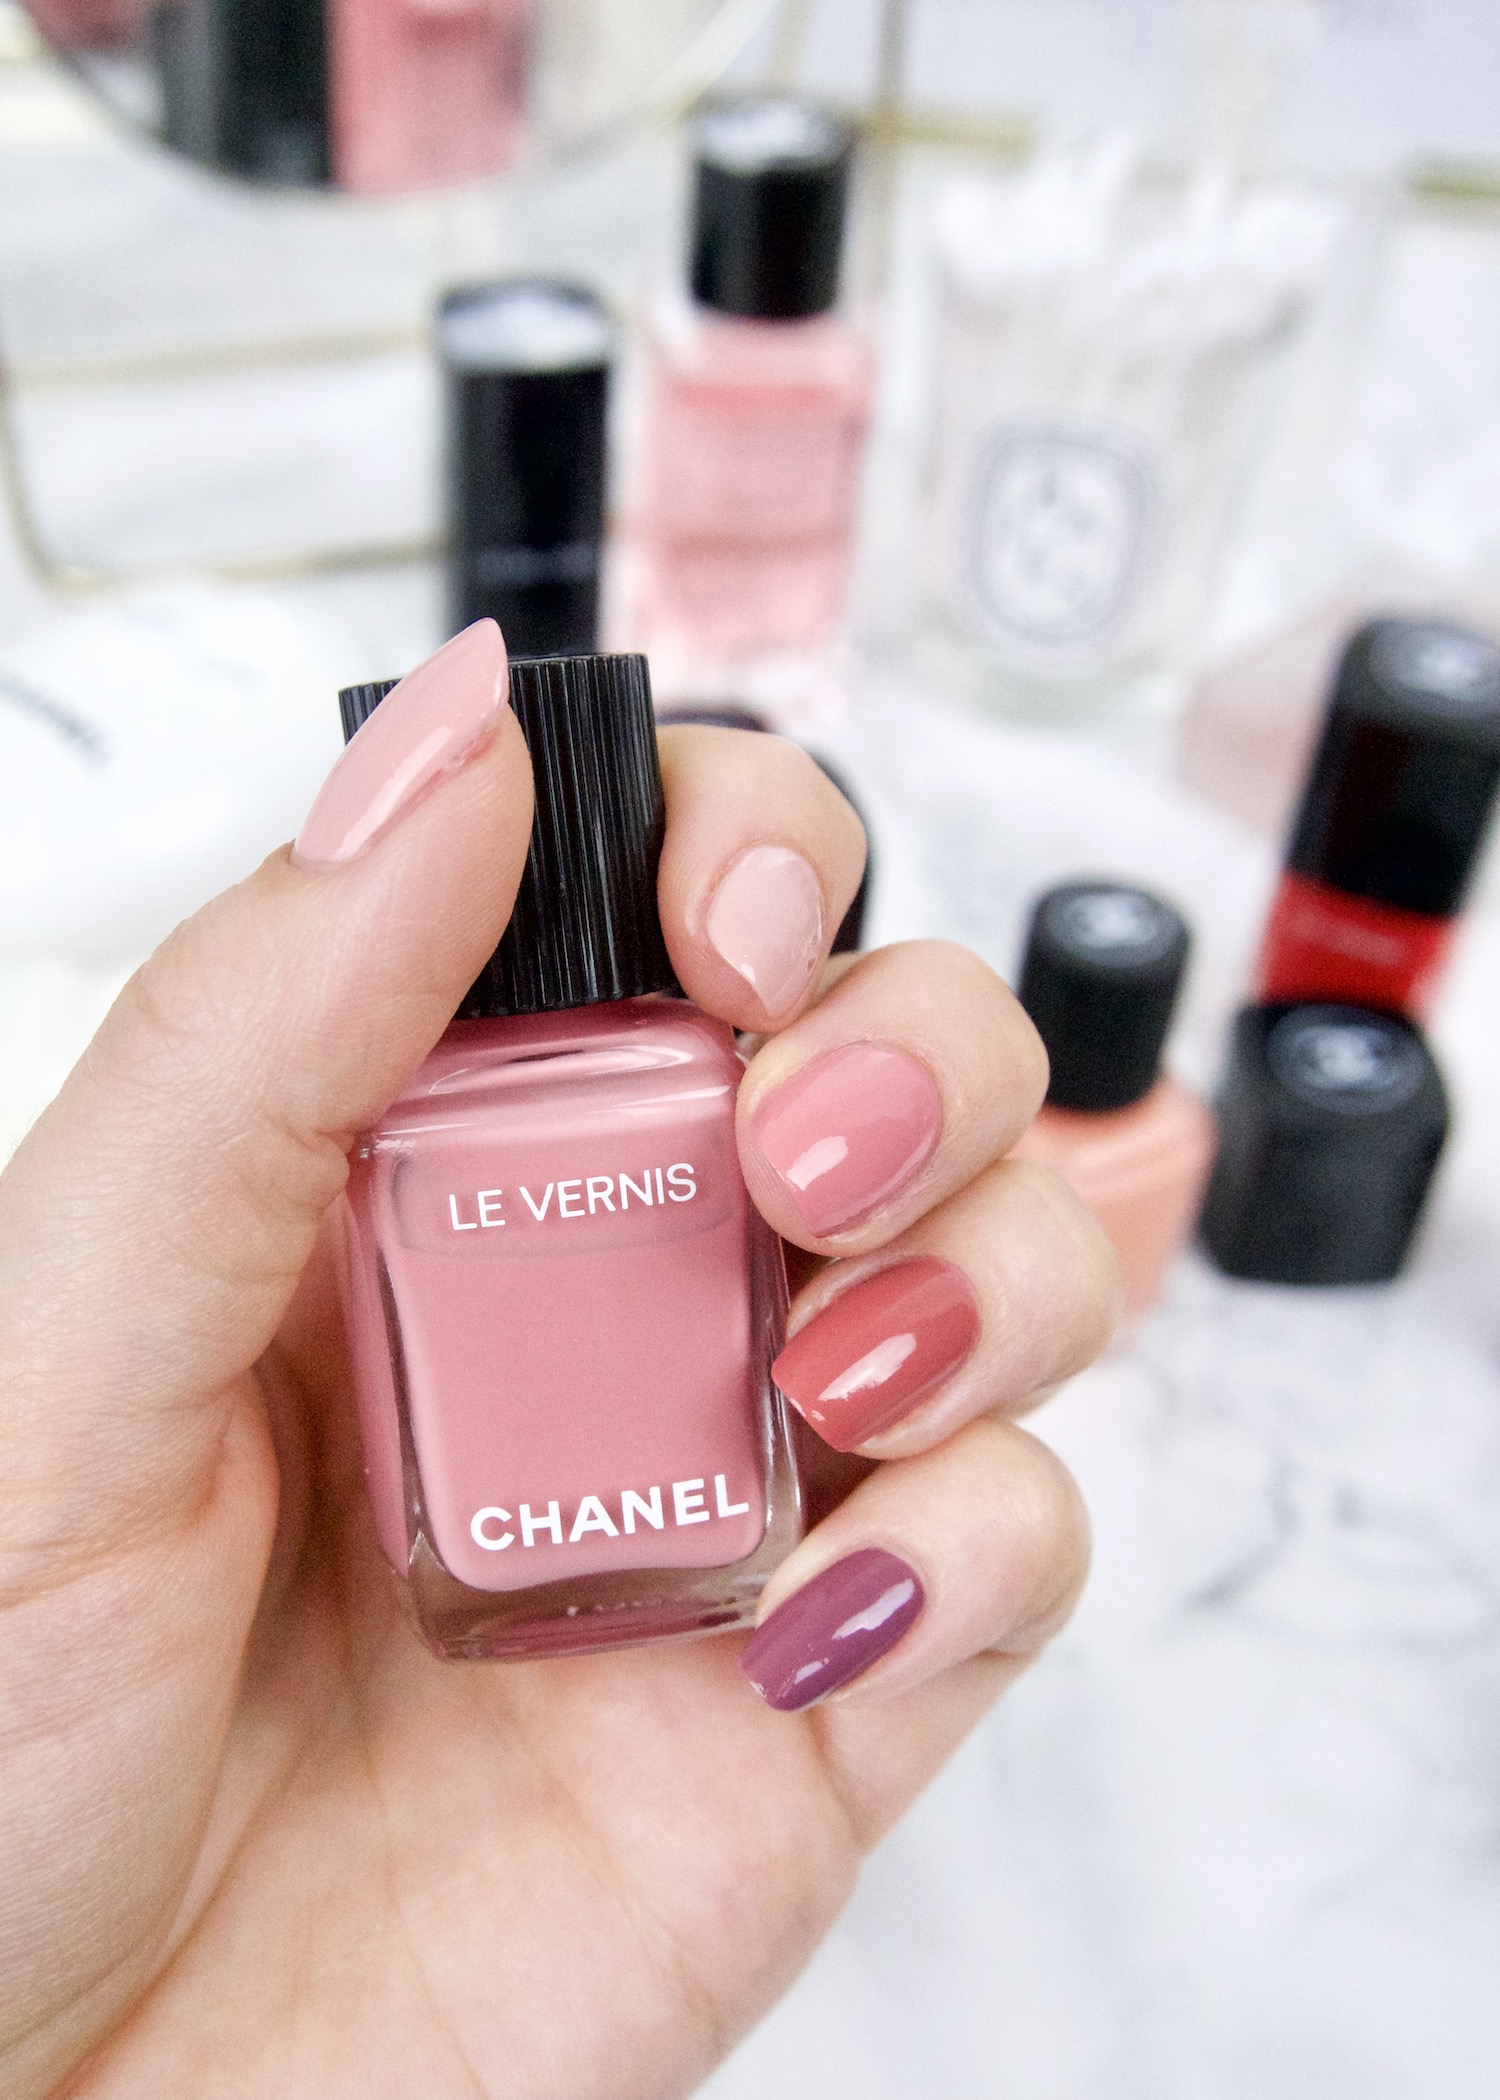 Chanel Le Vernis swatches op nagels